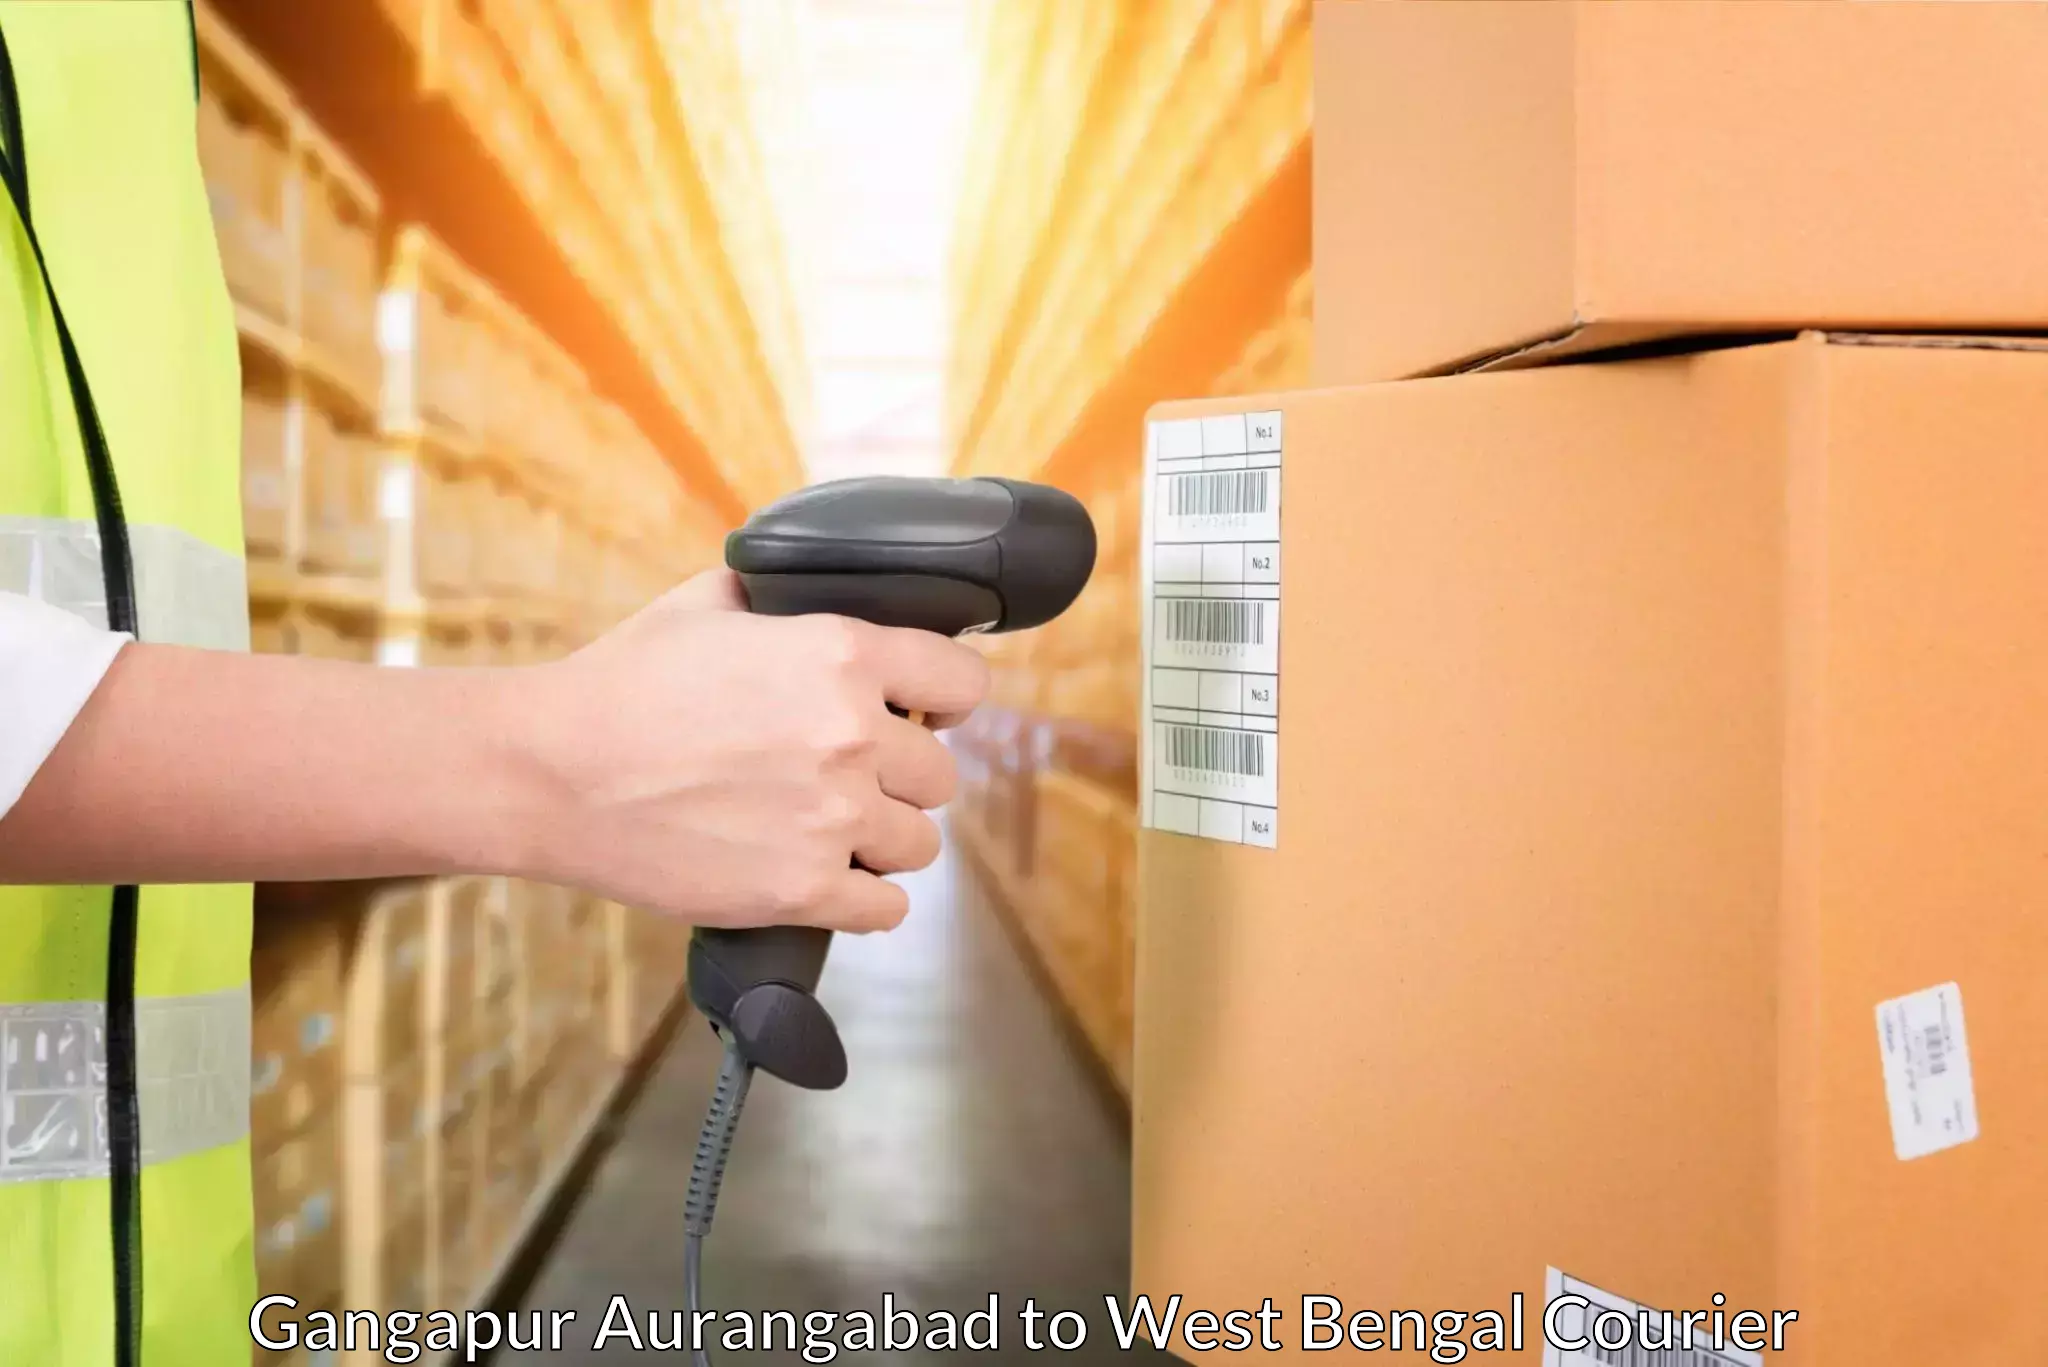 Easy access courier services in Gangapur Aurangabad to Samsi